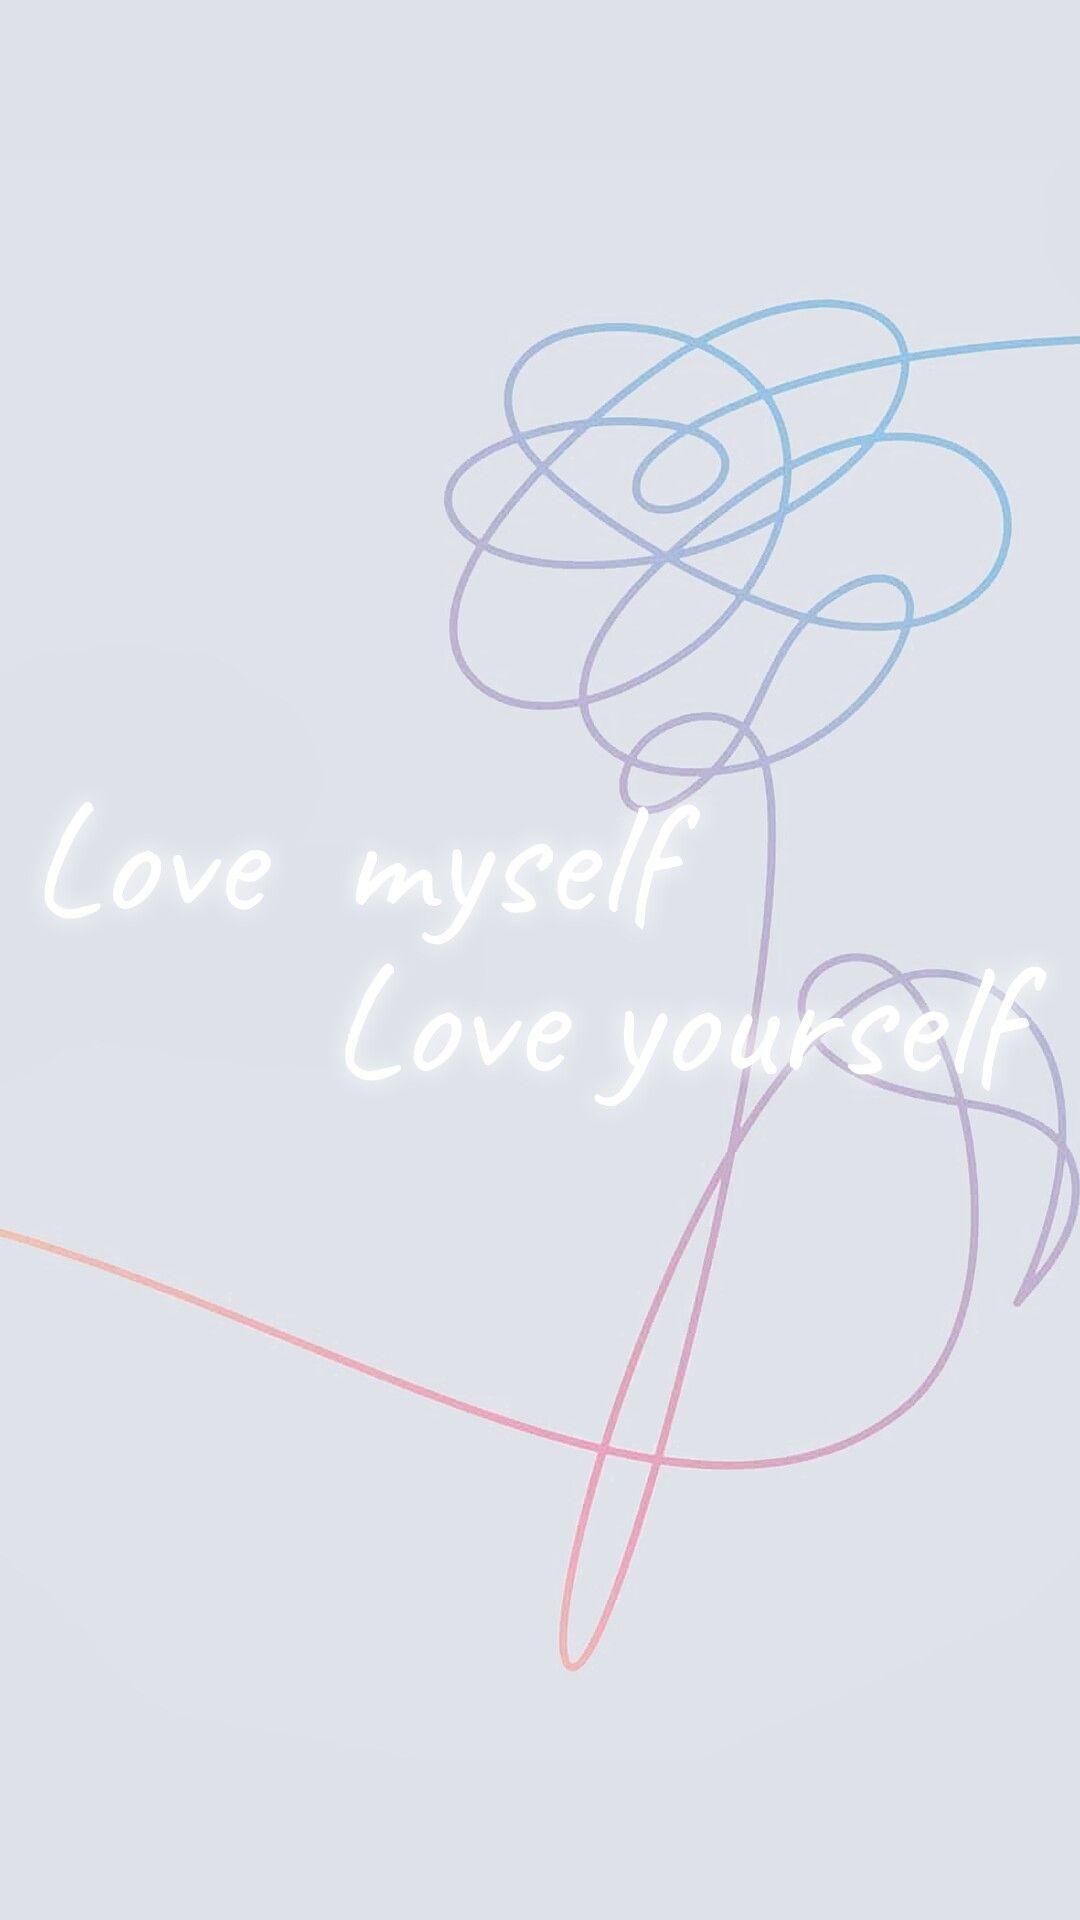 Love Myself Wallpapers Top Free Love Myself Backgrounds Wallpaperaccess